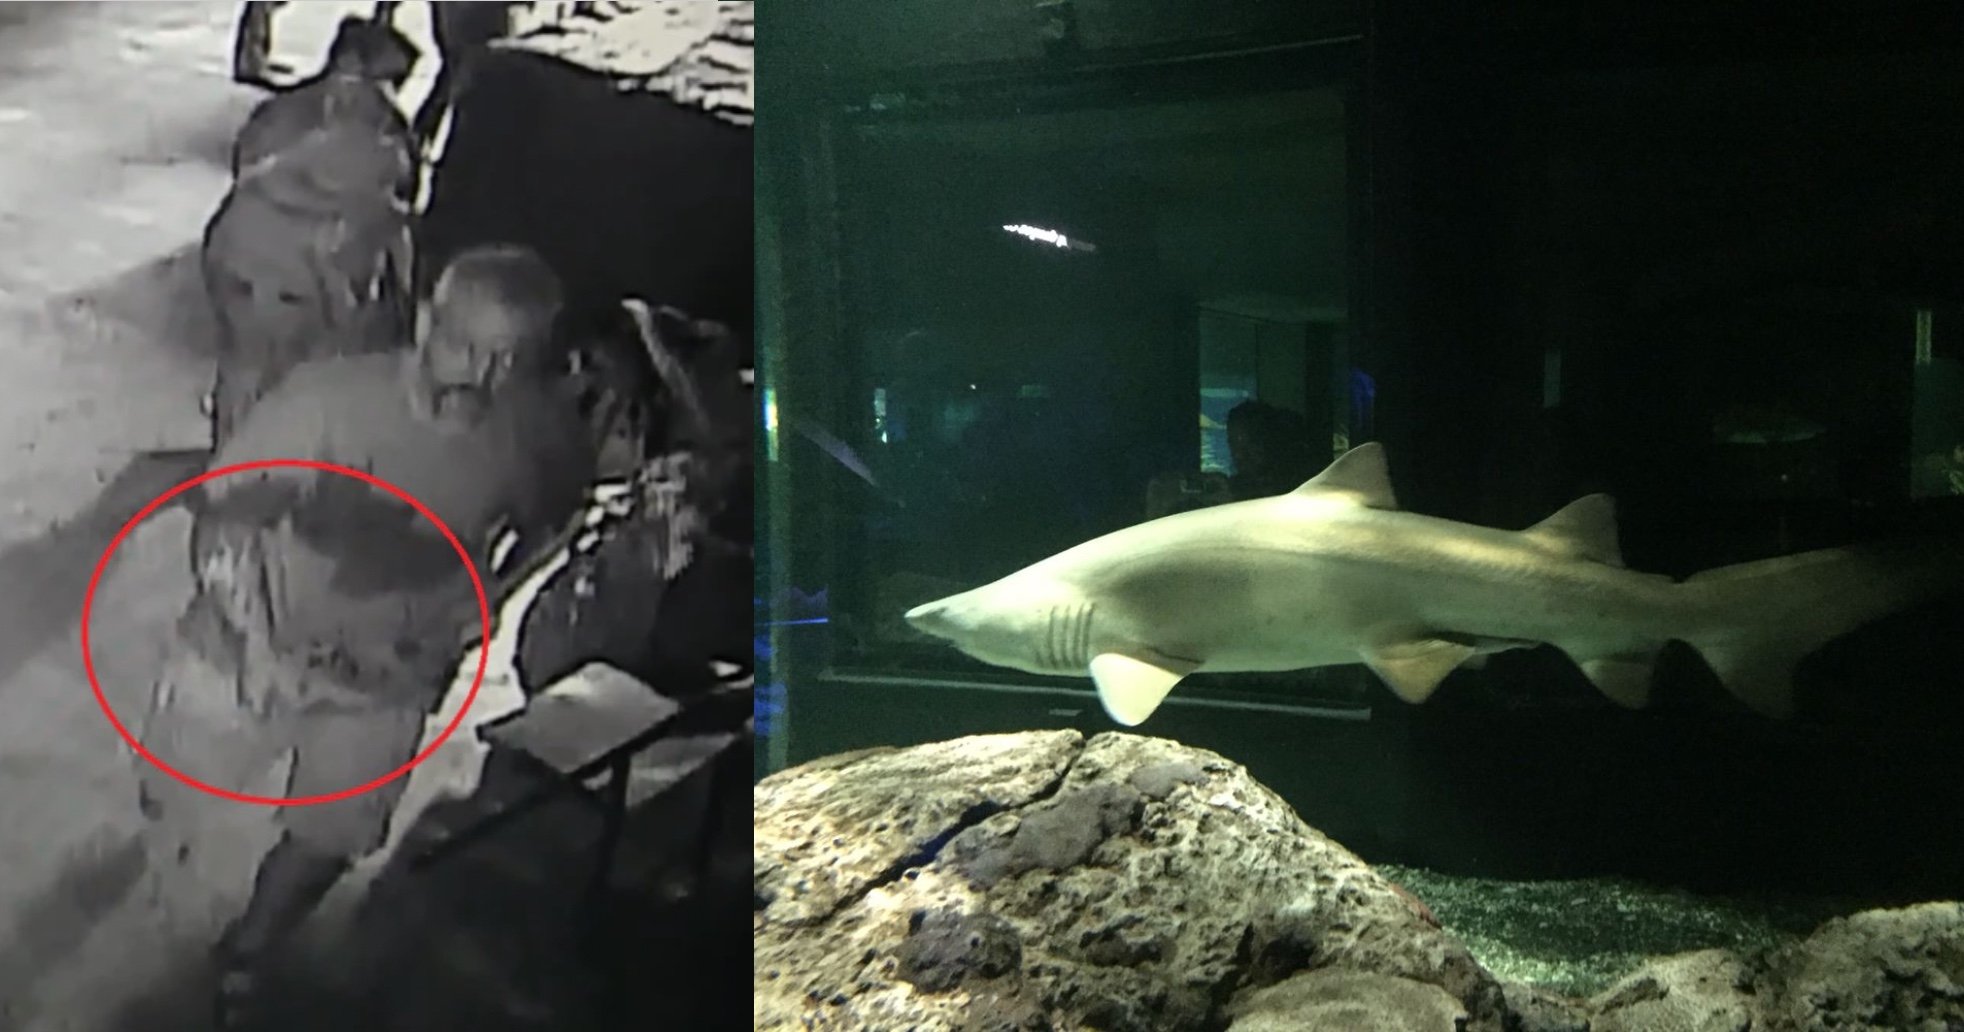 shark 1.jpg?resize=412,275 - Utterly ‘Insane’ Robbery In San Antonio Aquarium - Disguises A Shark Into A Baby And Hid It In The Stroller